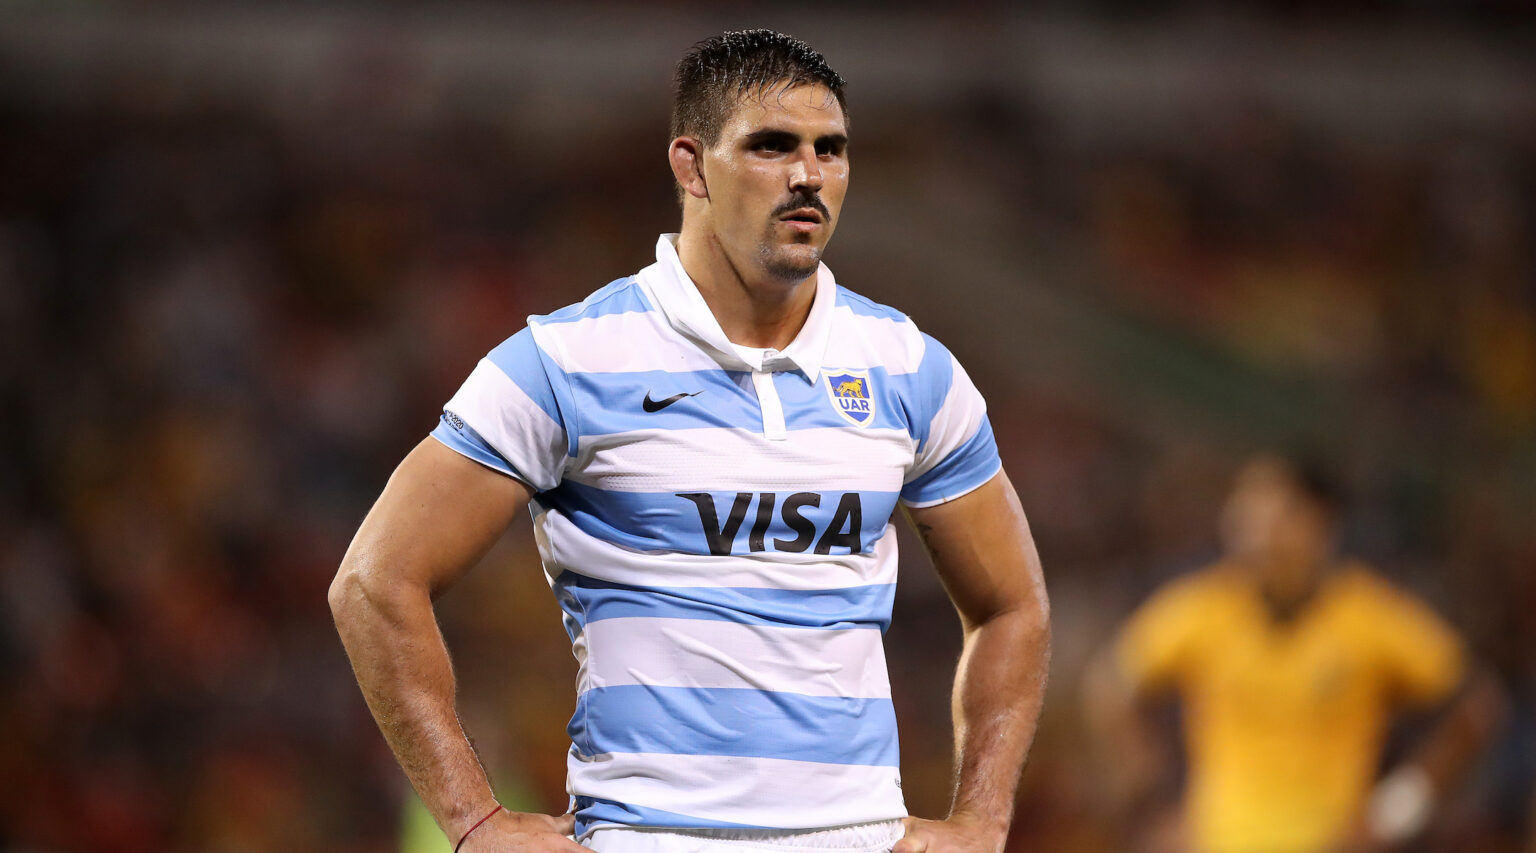 3 players suspended from Argentina's rugby team after antiSemitic